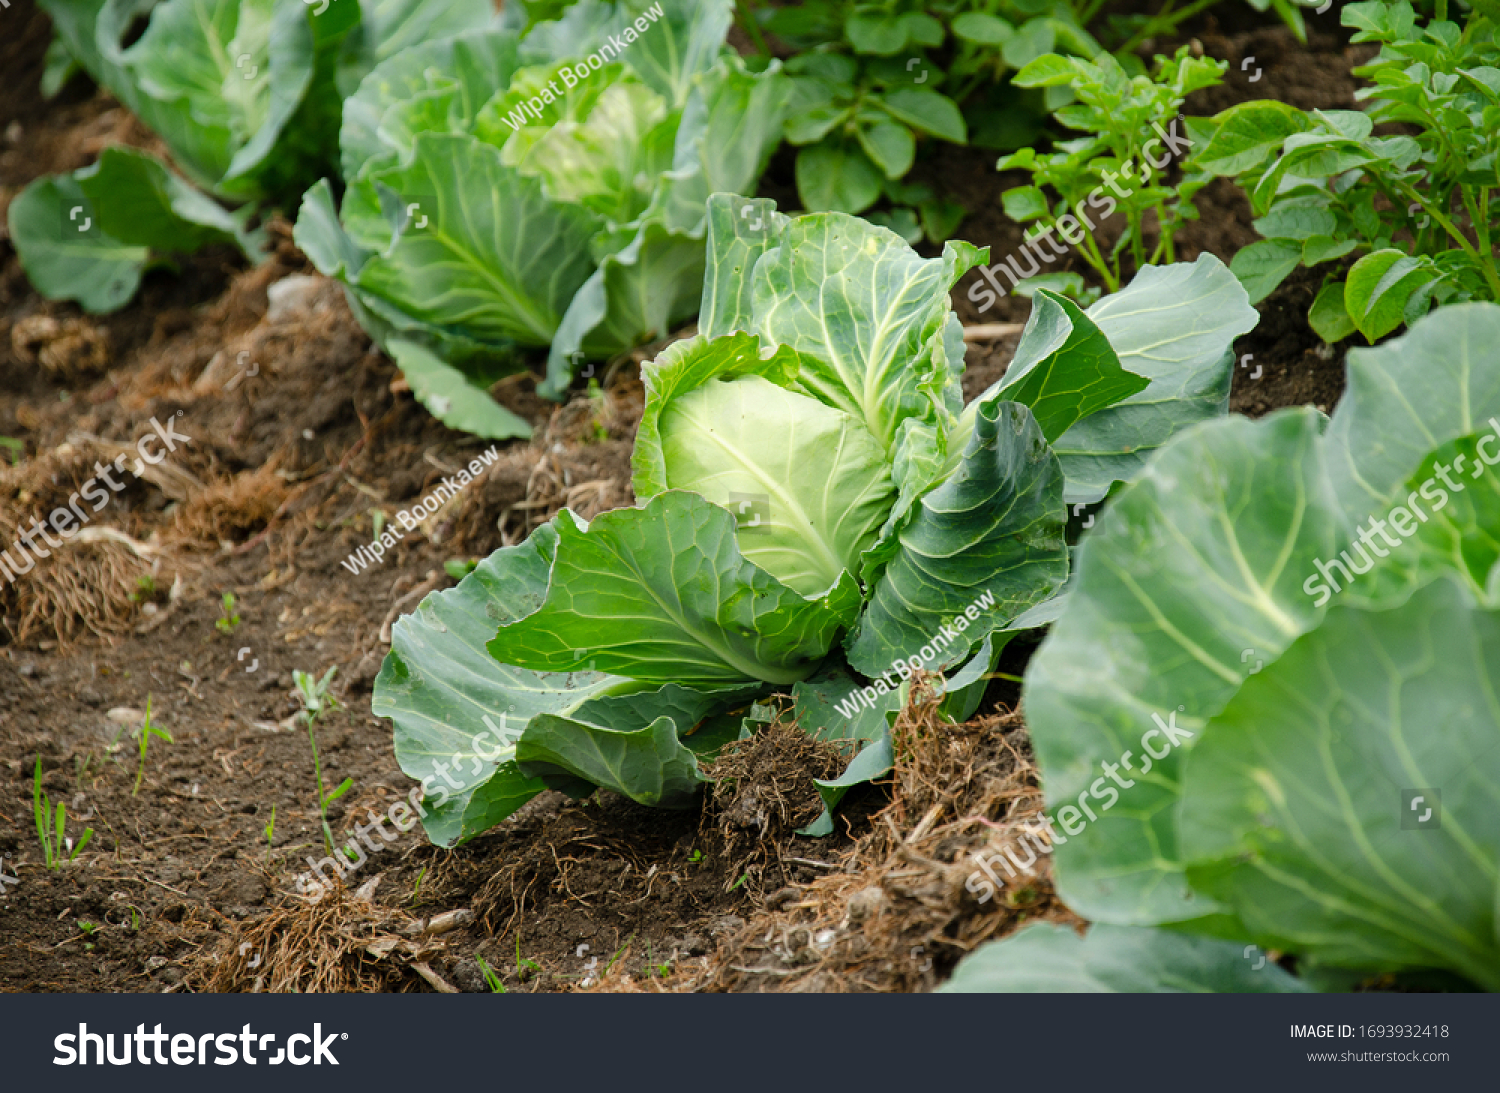 Fresh cabbage from farm field. View of green cabbages plants.Non-toxic cabbage.Non-toxic vegetables.Organic farming. #1693932418